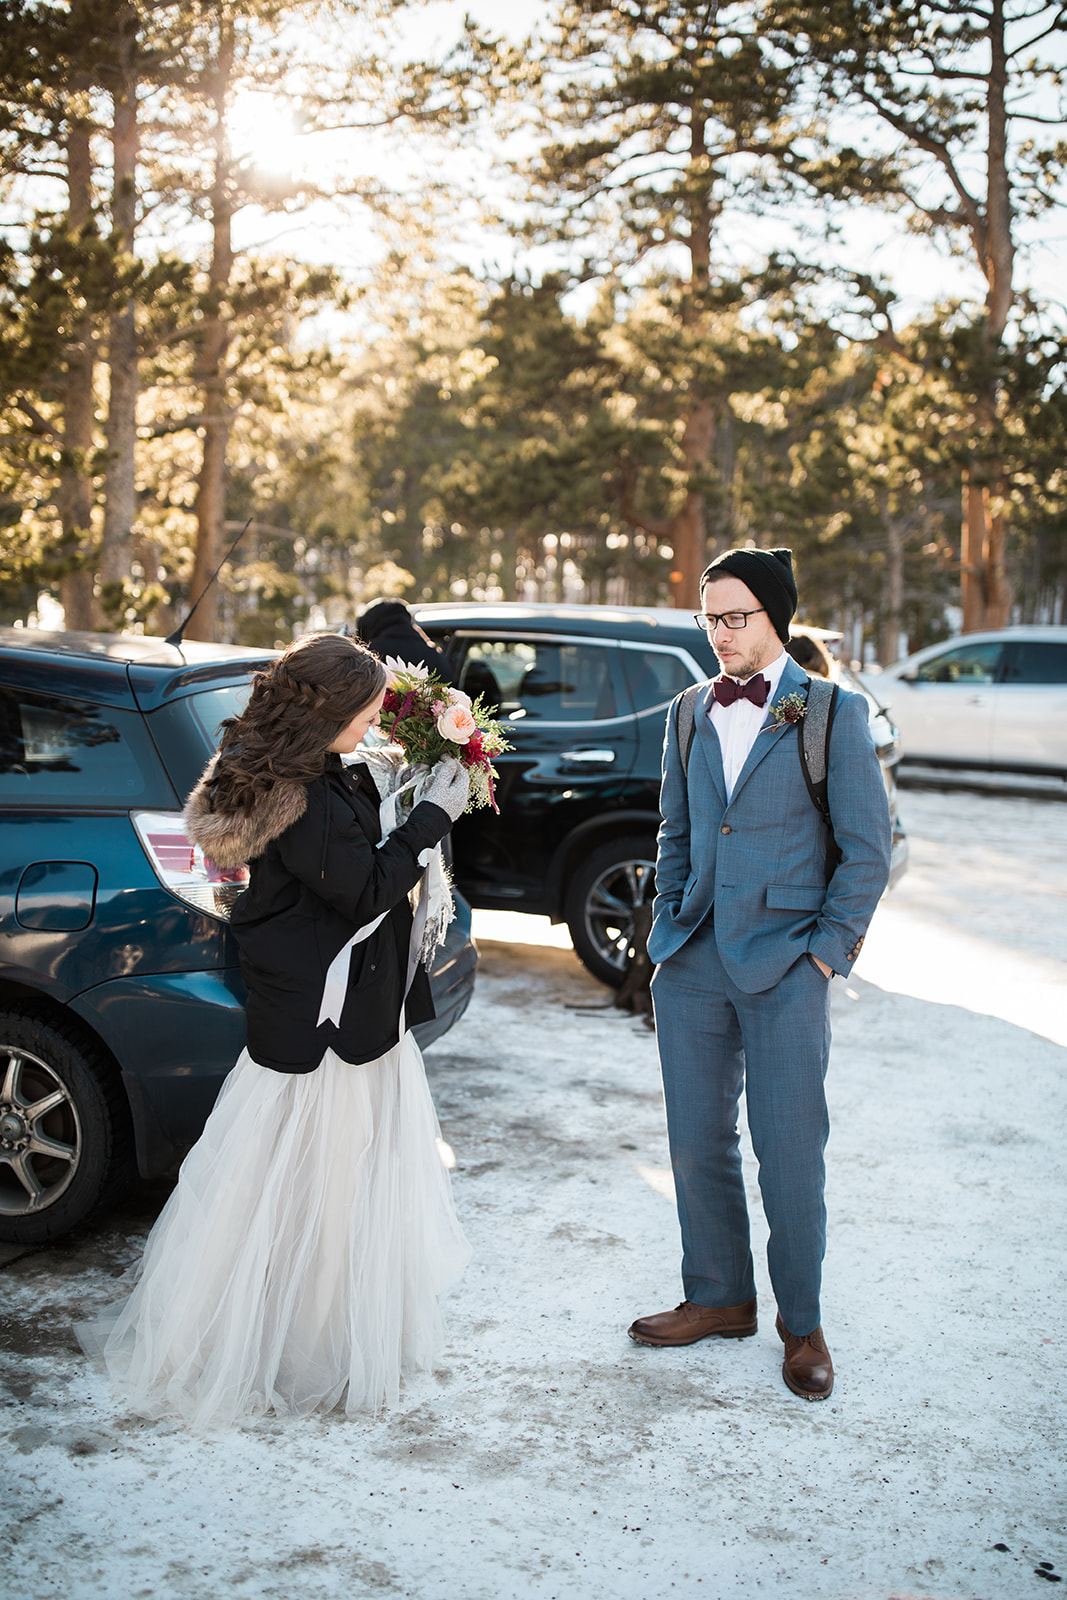 Bride and groom get out of car at Sprague Lake for intimate elopement